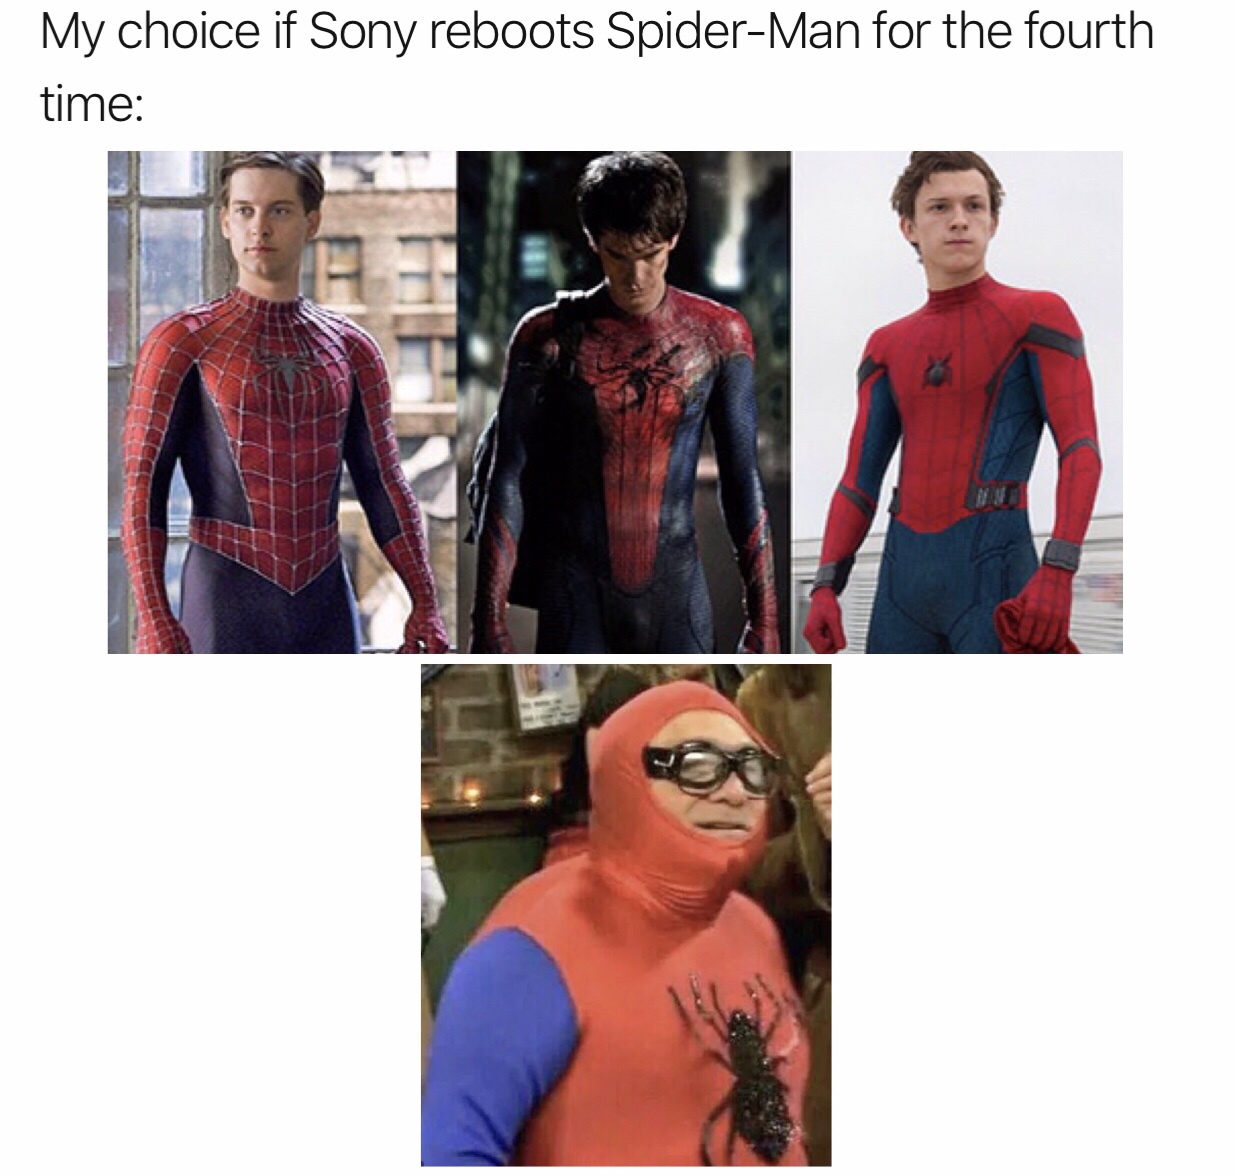 My choice if Sony reboots SpiderMan for the fourth time